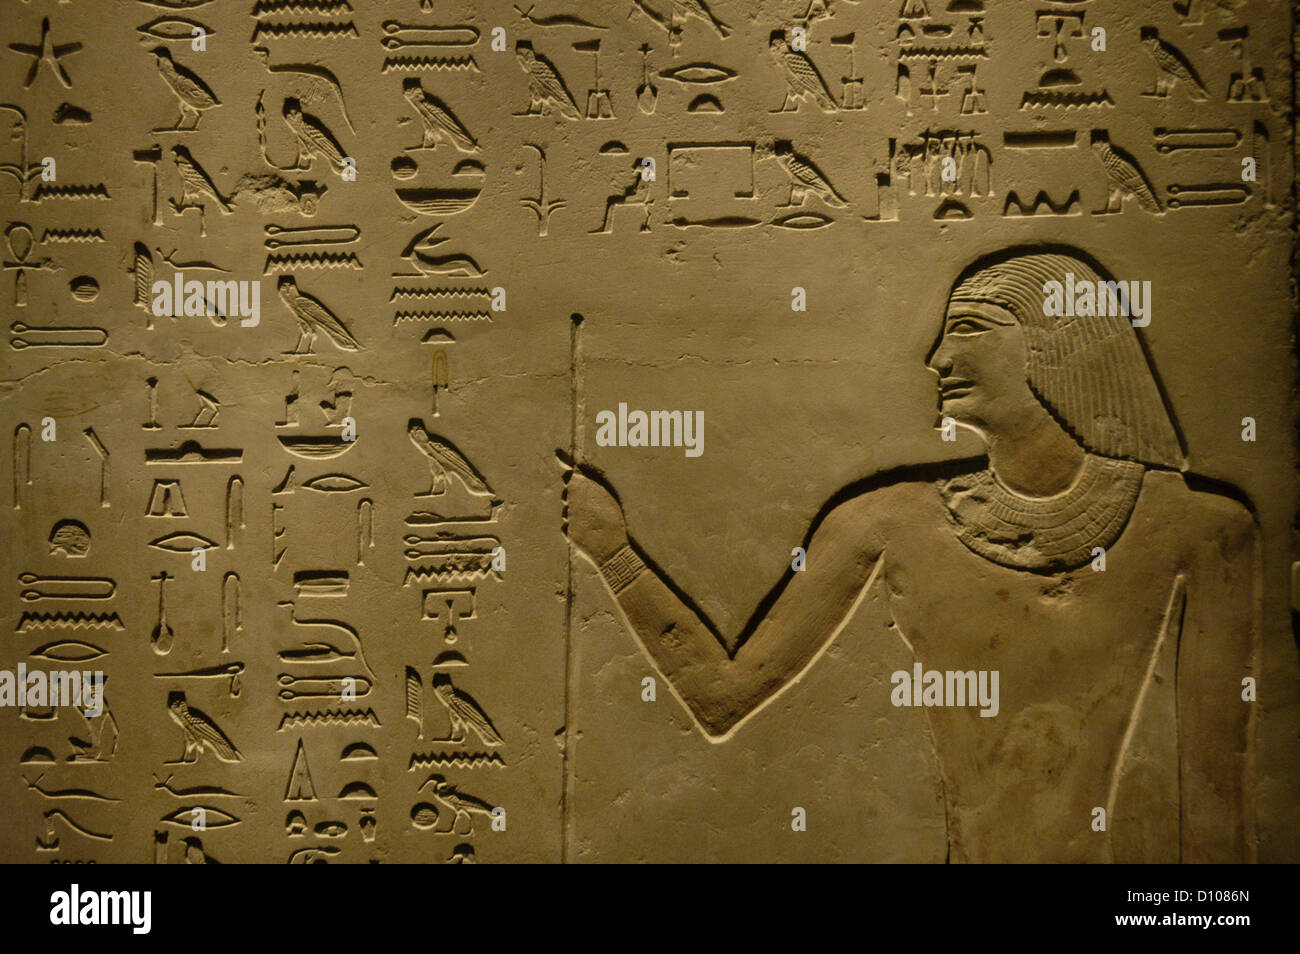 Egypt. Stele of the tomb of Methethi with his son Ihy with hieroglyphic writing. Detail of Methethi. Around 2400 BC. Stock Photo